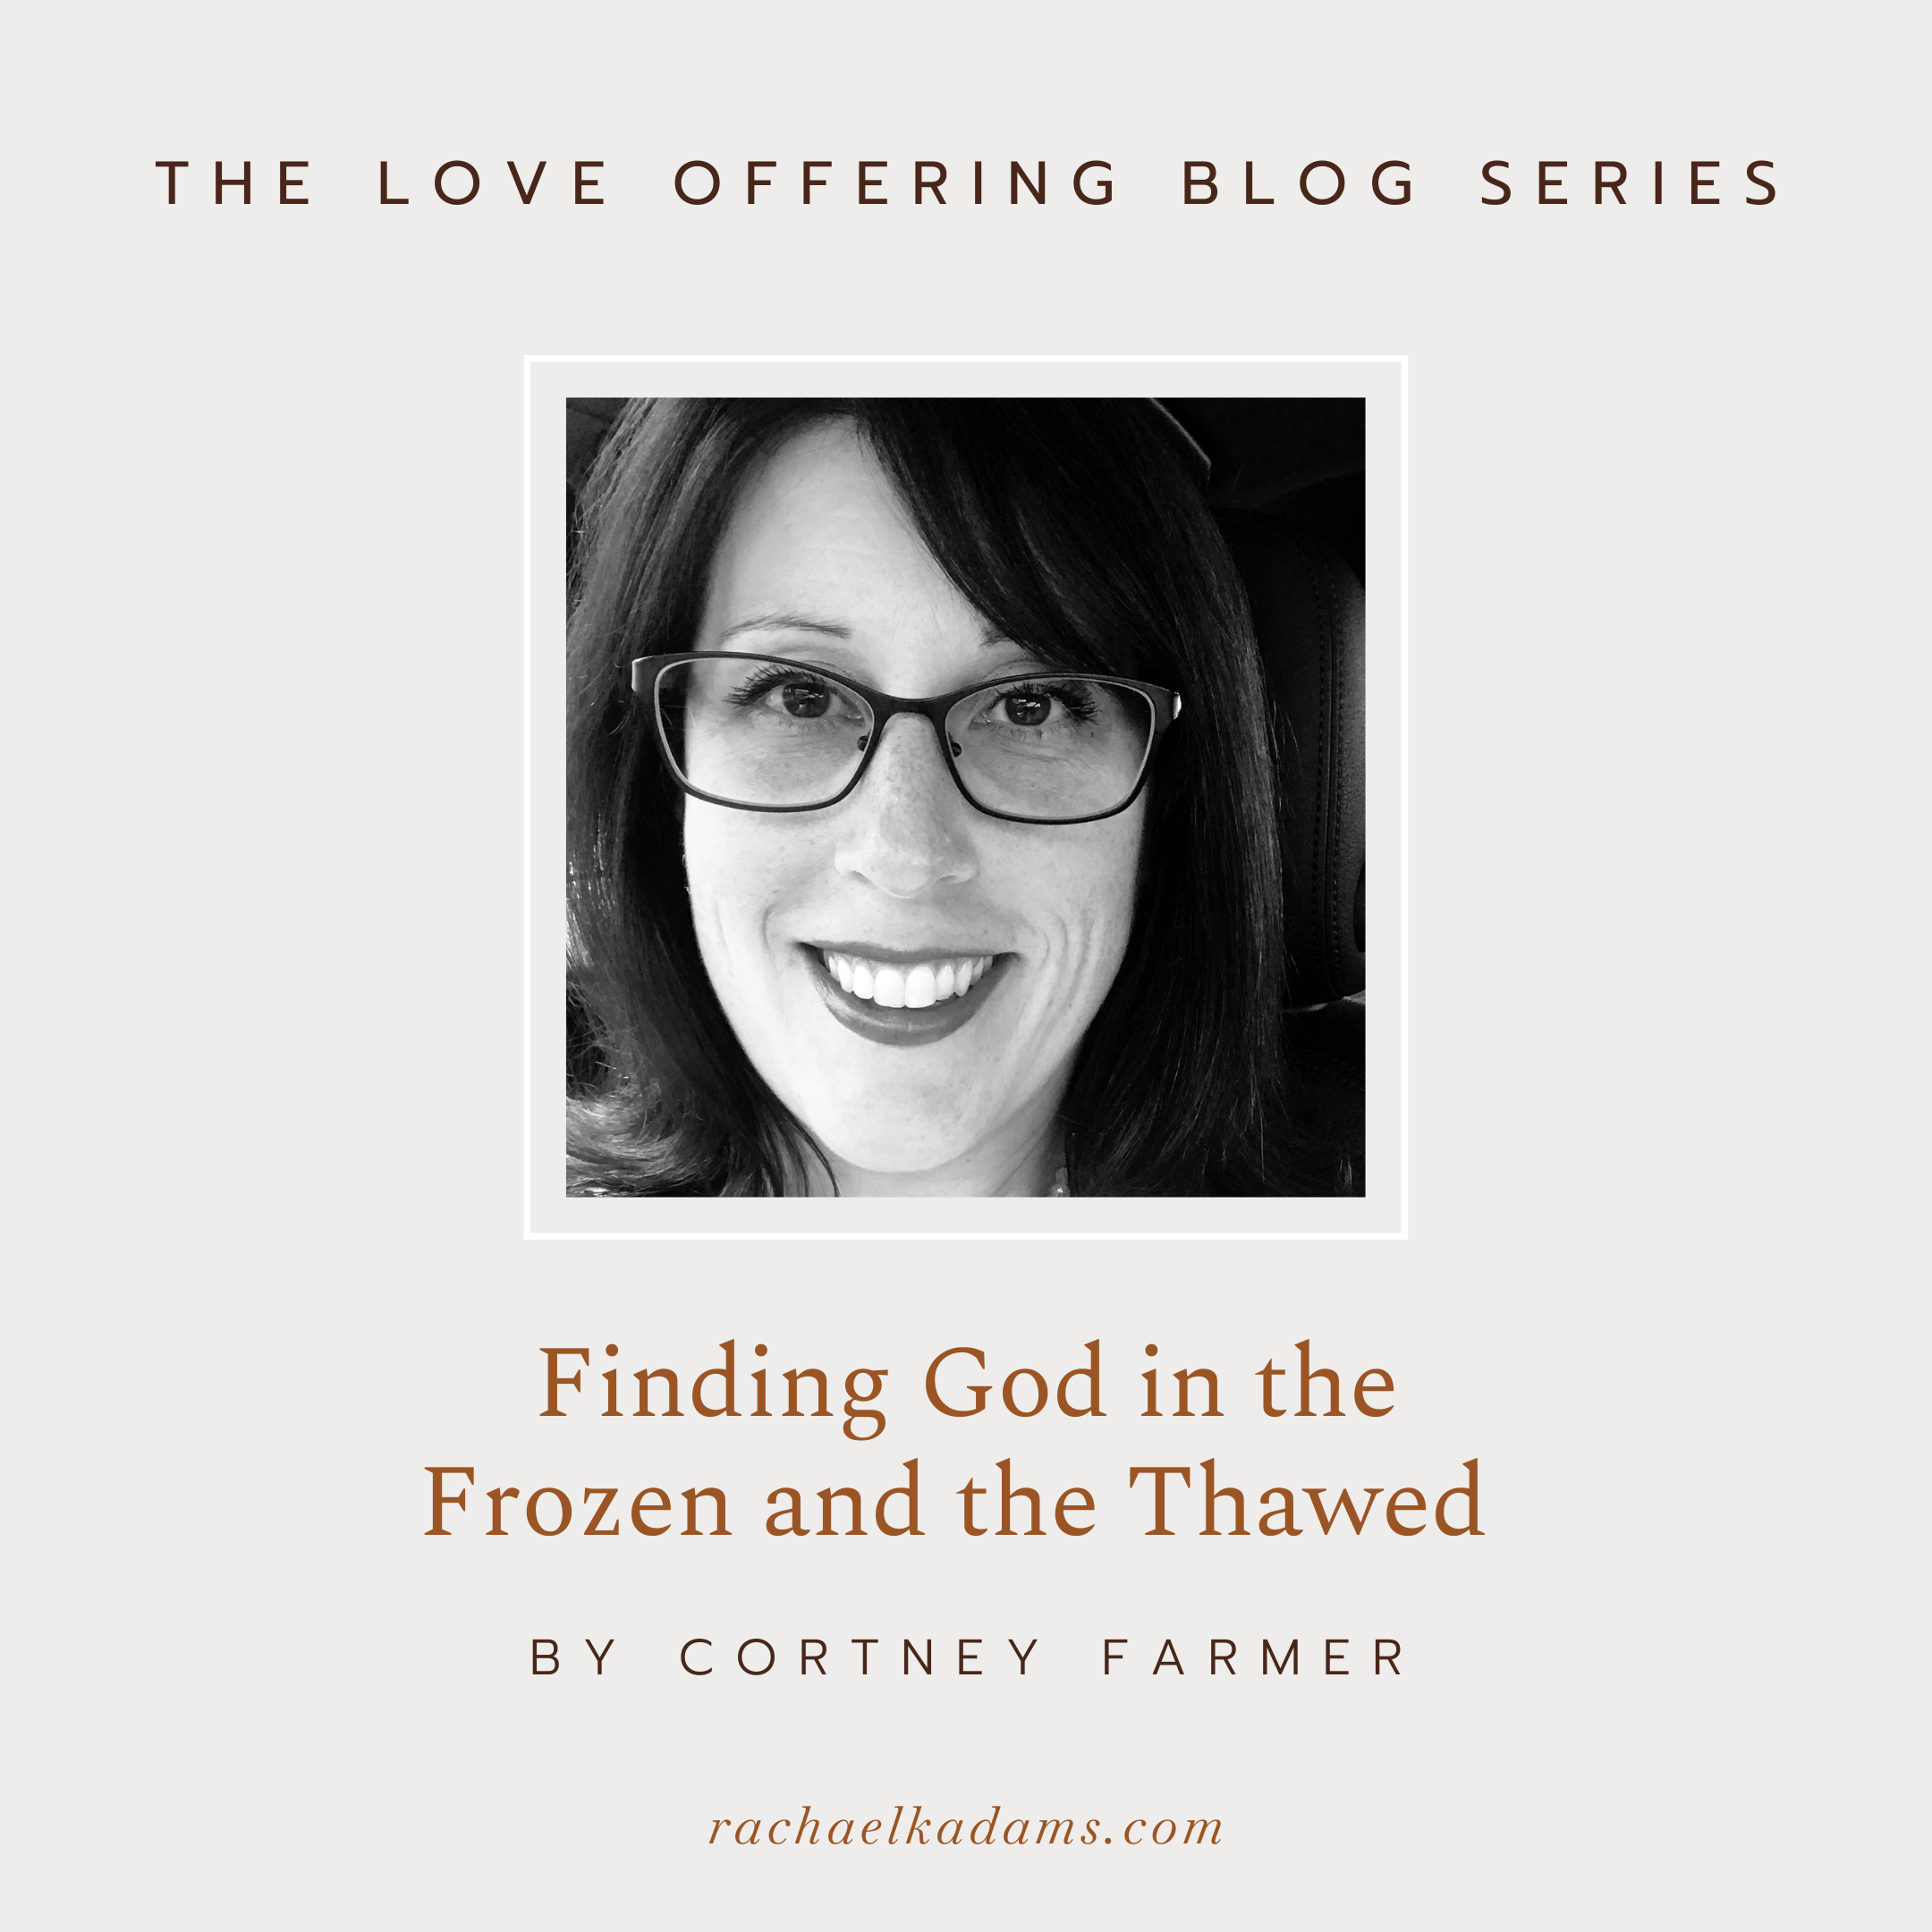 Finding God in the Frozen and the Thawed by Cortney Farmer